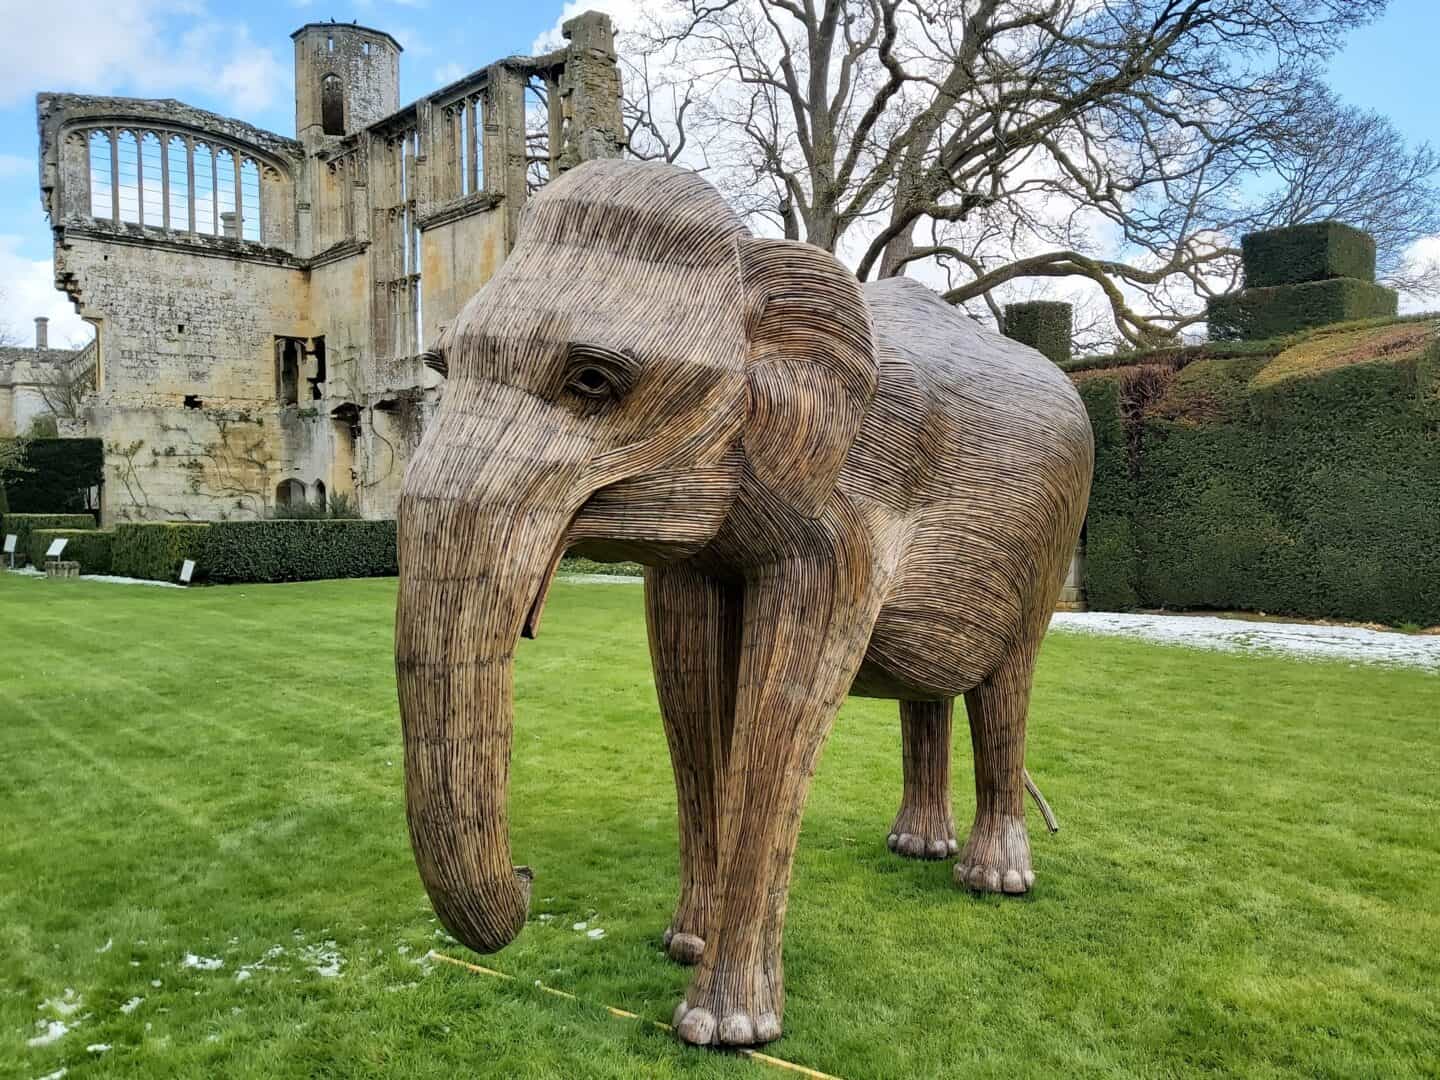 Elephant sculpture with Sudeley Castle ruins in the background